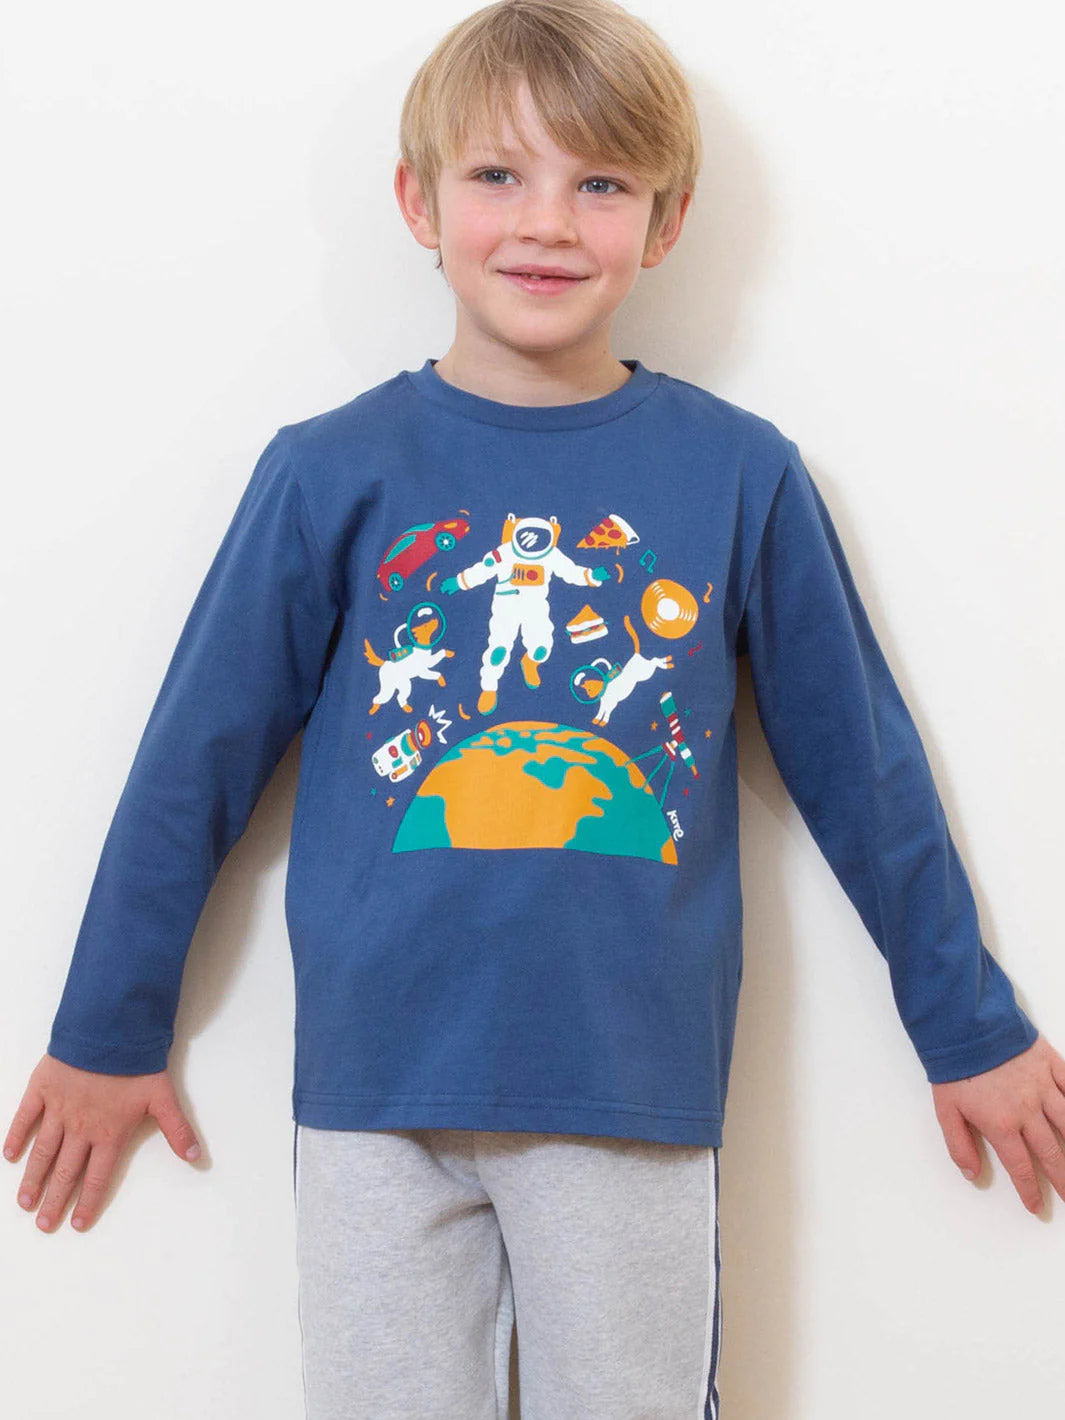 Kite Stuff in Space Long Sleeve T-shirt